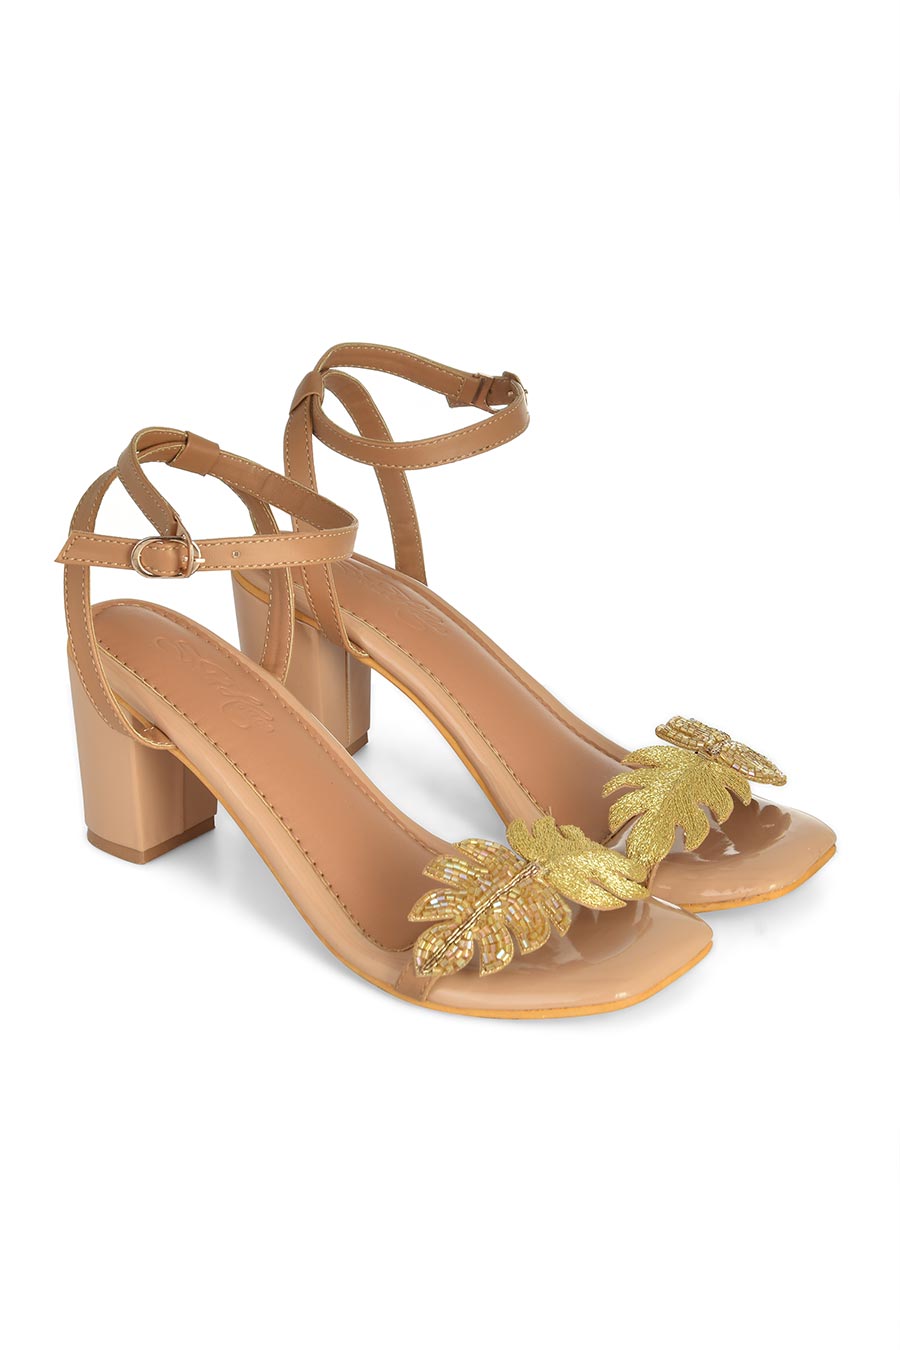 Embroidery Gold Leaf Lexie Heels